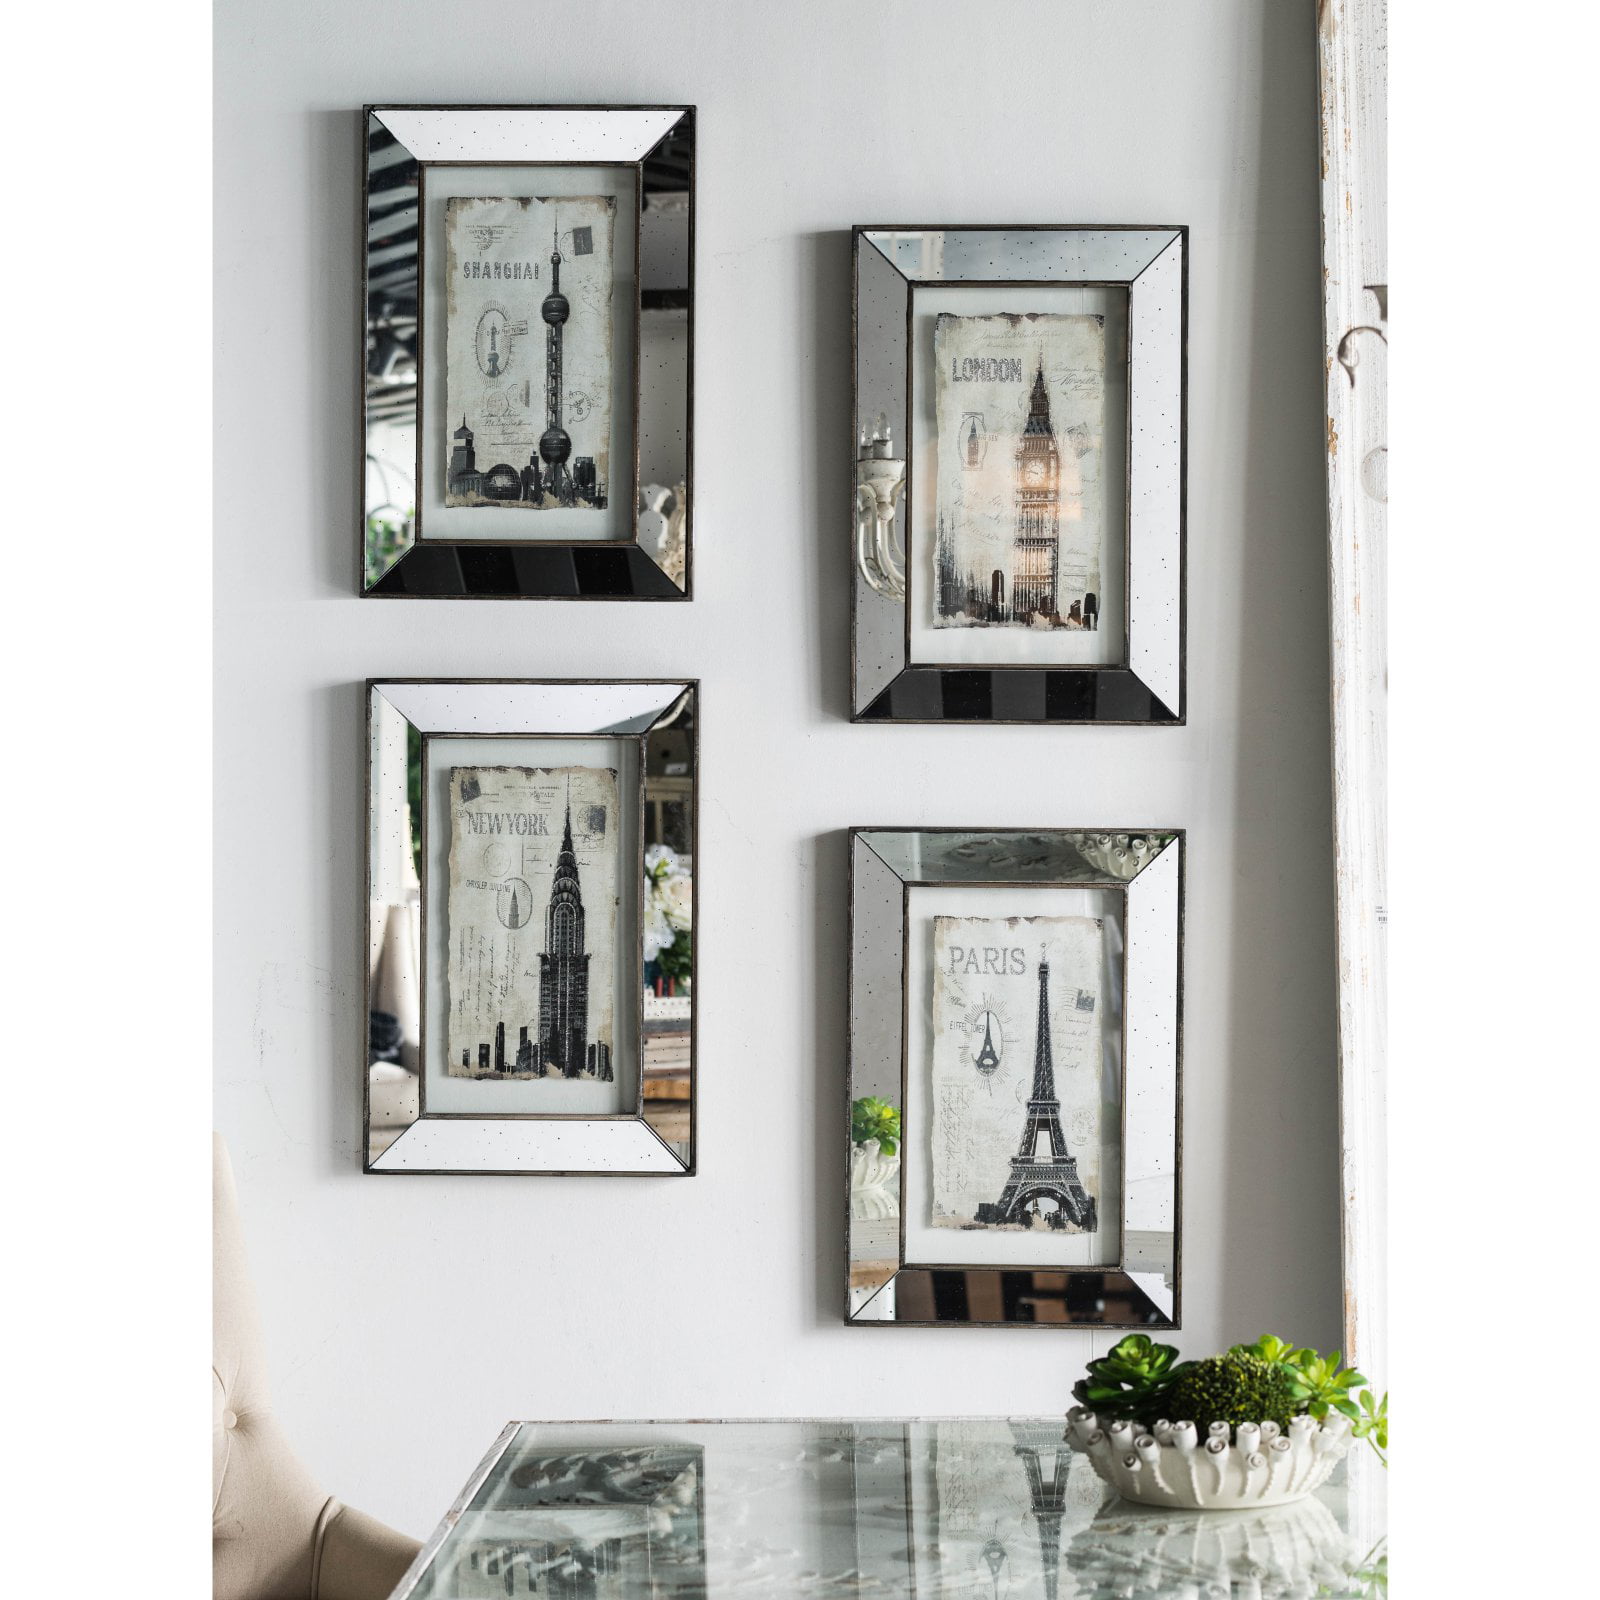 Home Architecture Mirrored Wall Art, Mirrored Frames Wall Art